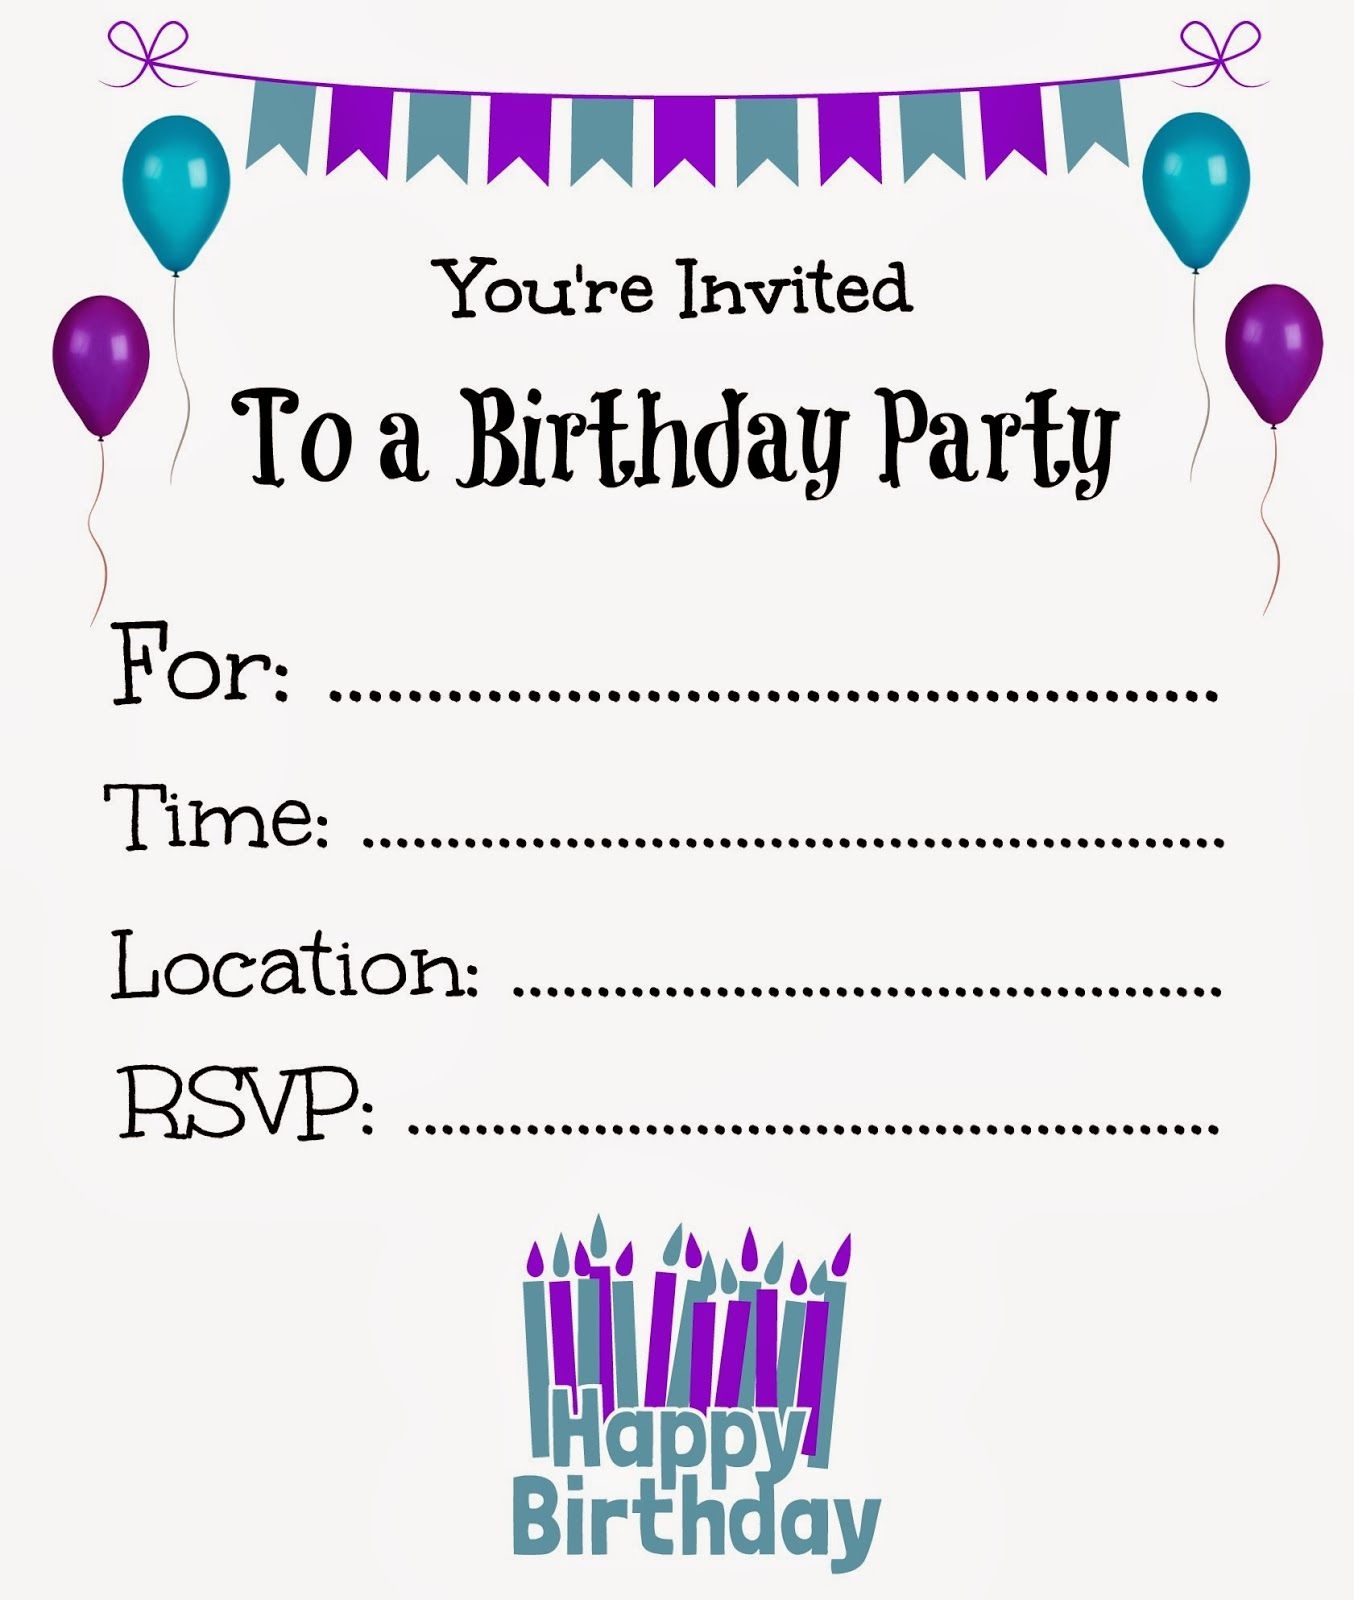 It s A Princess Thing Free Printable Birthday Invitations Birthday Party Invitations Printable Birthday Party Invitations Free Printable Birthday Invitations - Free Printable Birthday Invitations With Pictures